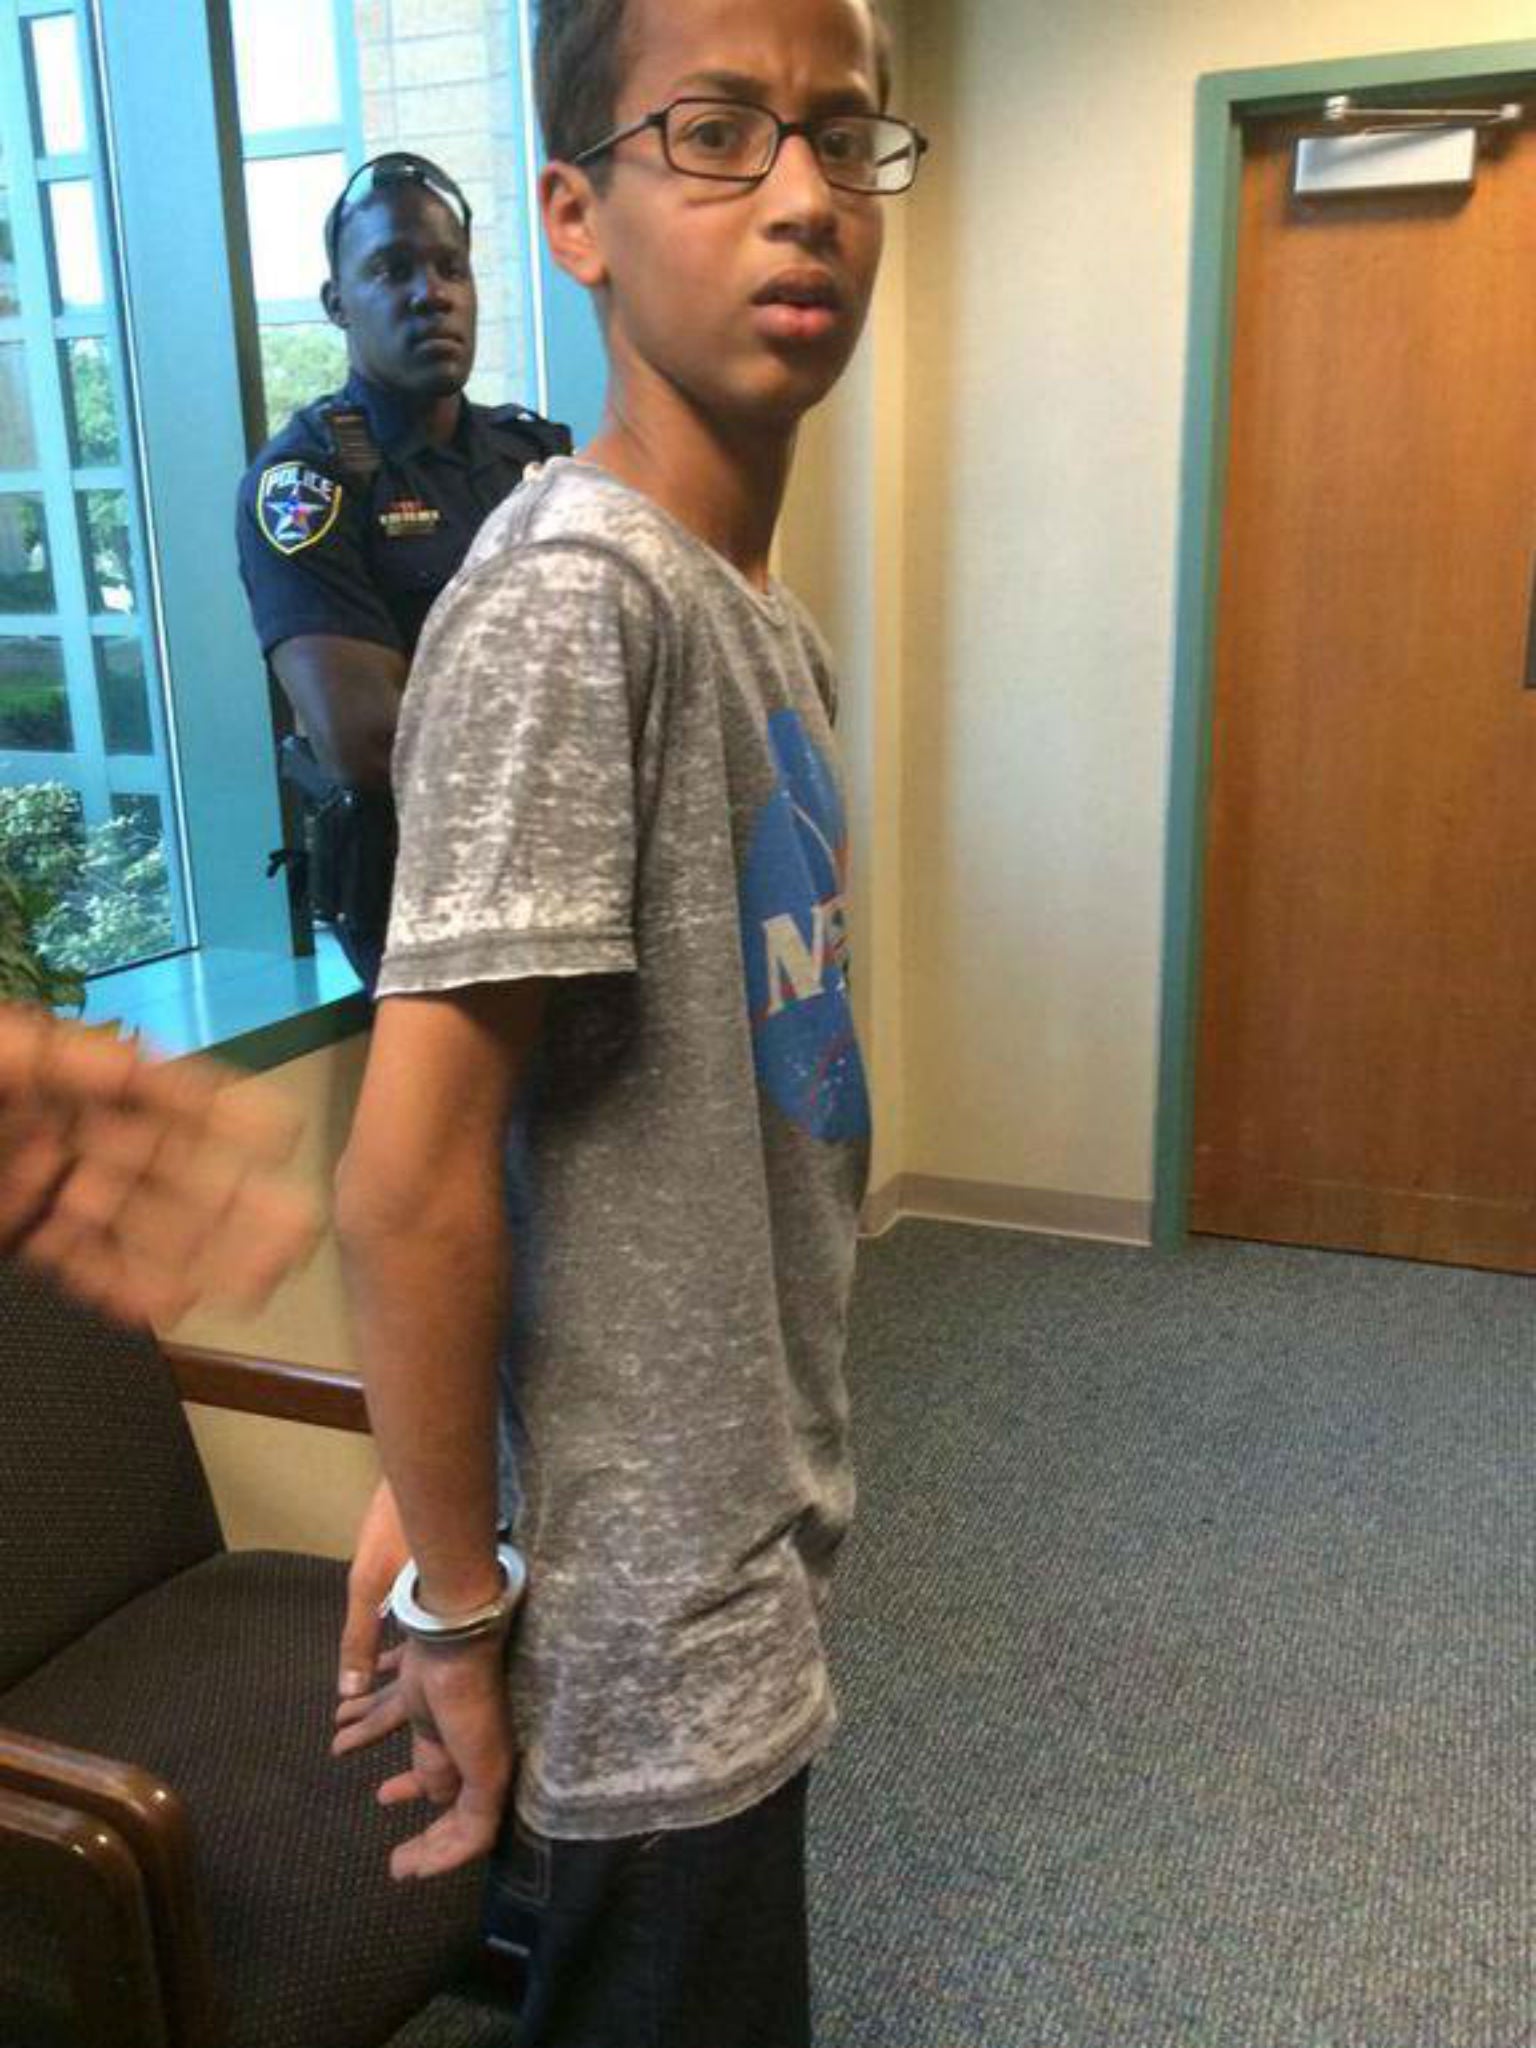 Ahmed being led away in handcuffs